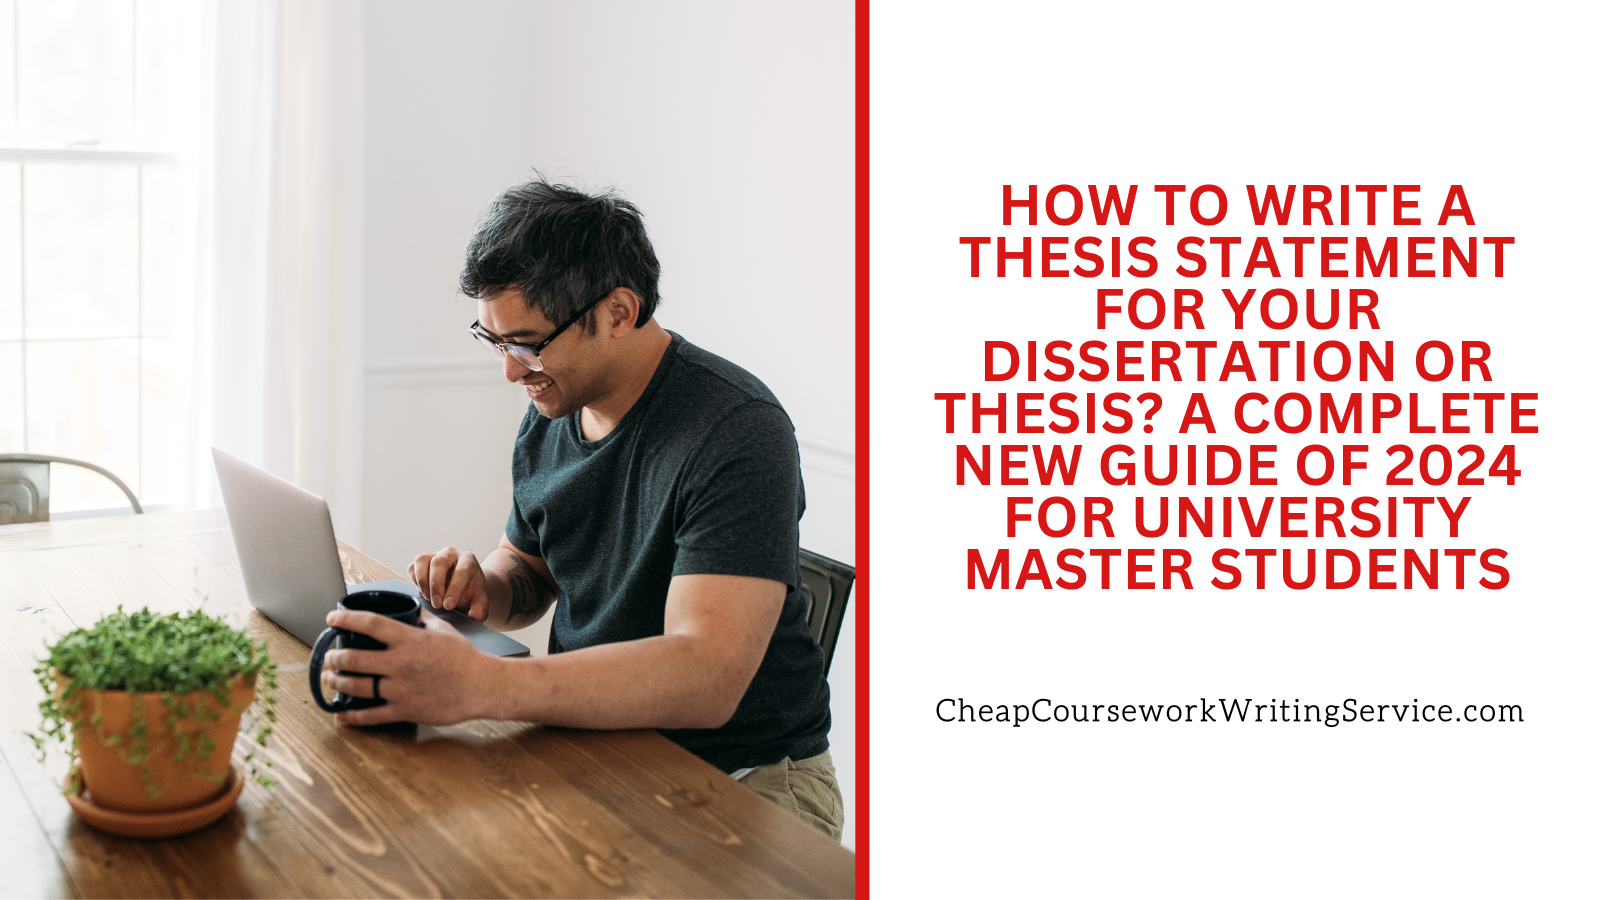 How To Write A Thesis Statement For Your Dissertation Or Thesis? A Complete New Guide of 2024 For University Master Students